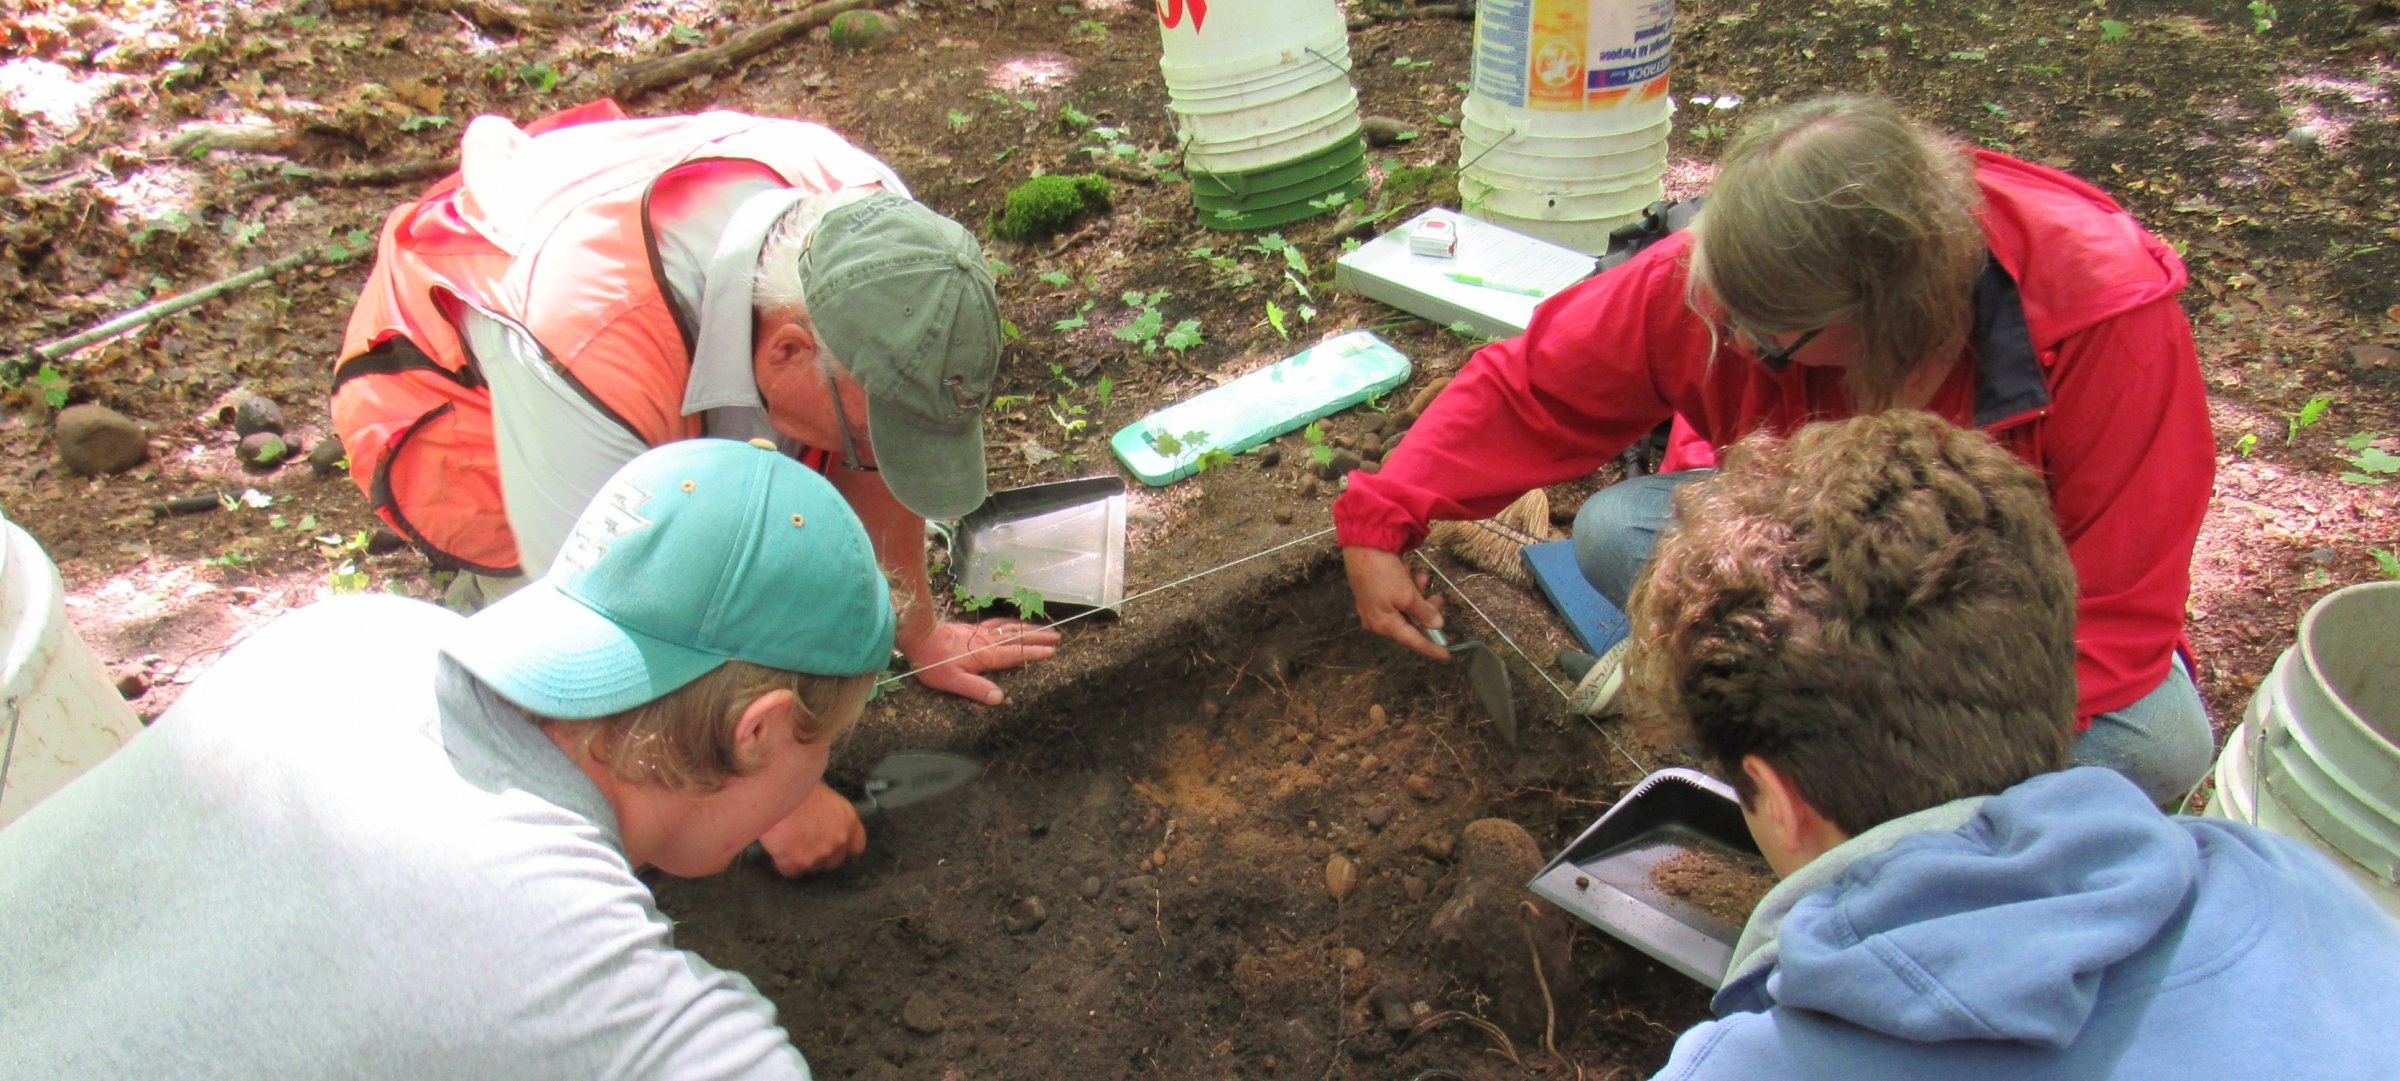 Students digging for artifacts during summer field school